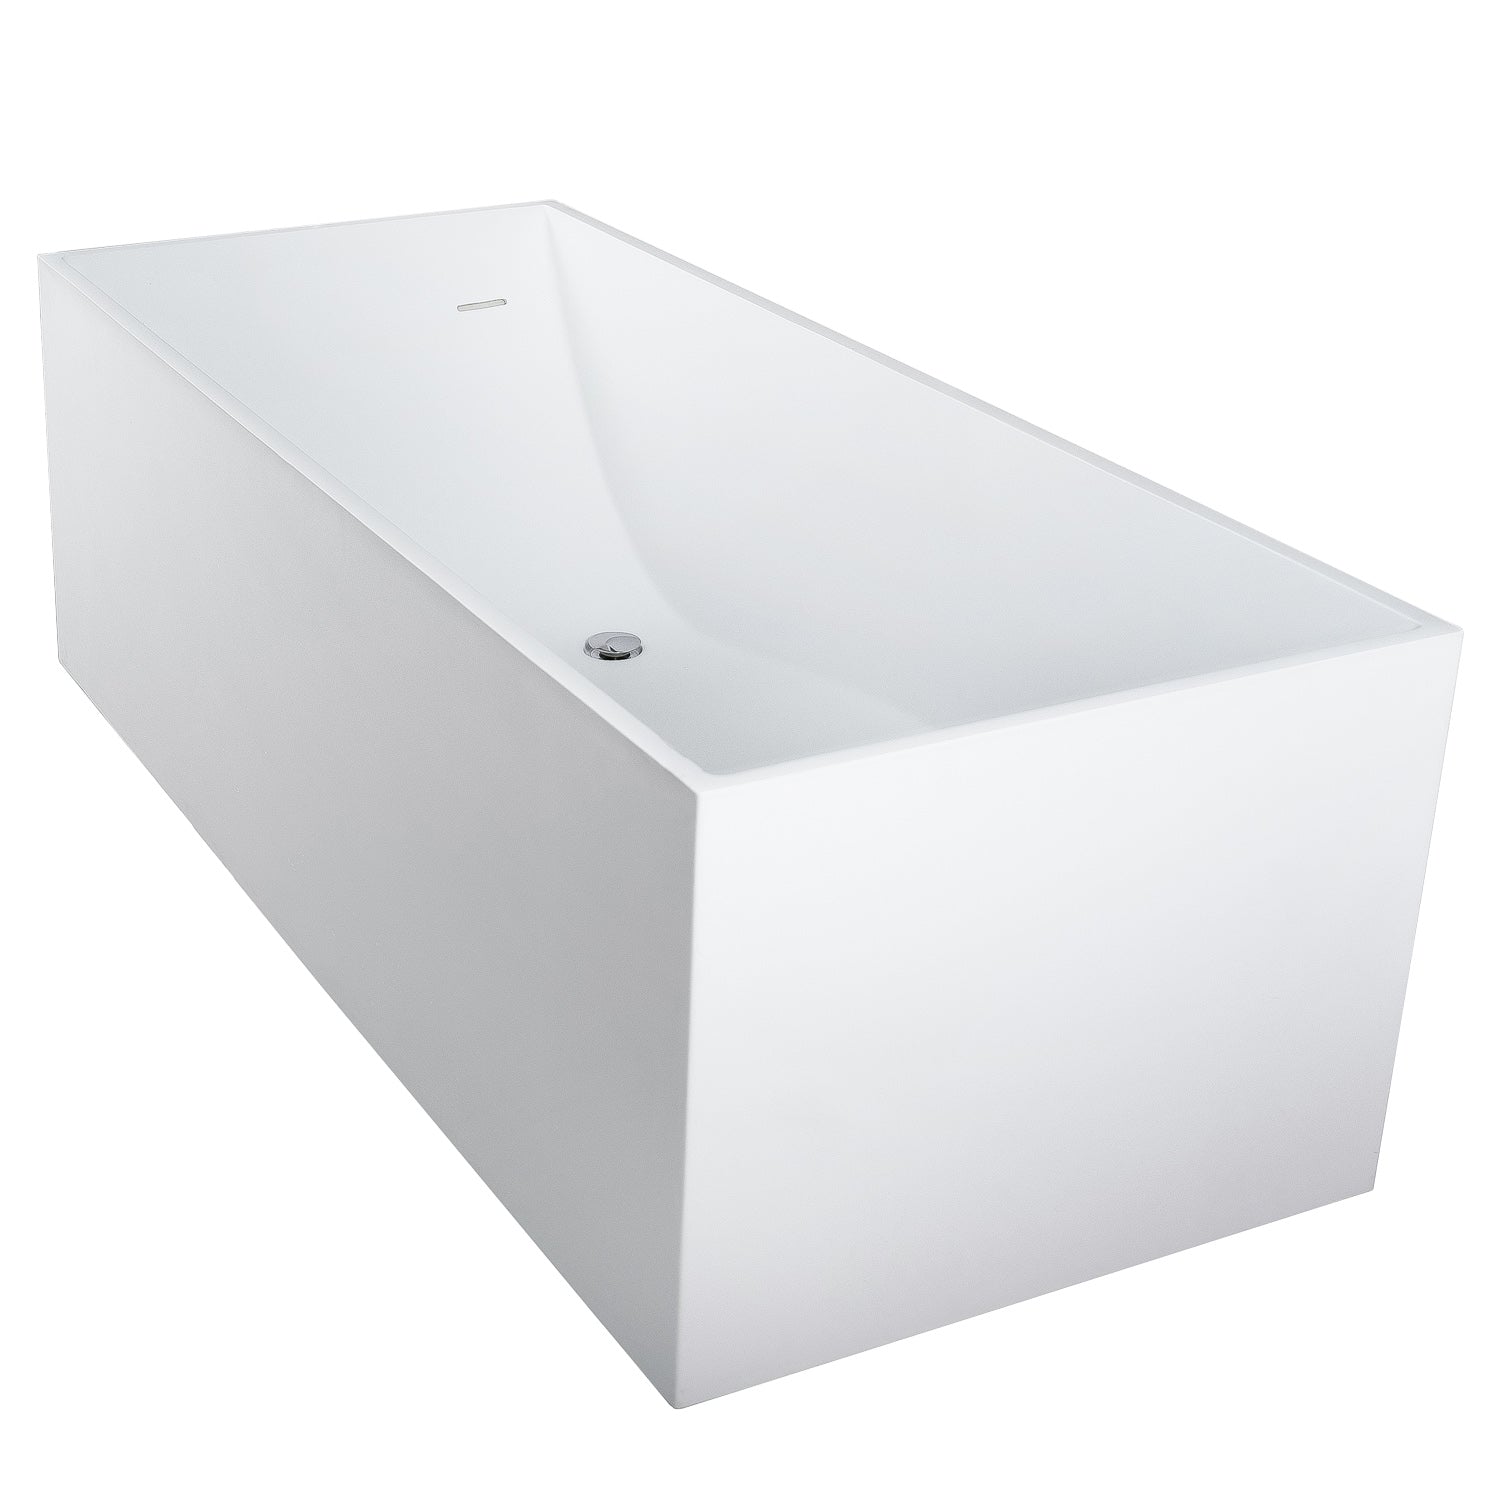 DAX Square Freestanding Solid Surface Bathtub with Central Drain and Overflow, Stainless Steel Frame, 66-1/8 x 21-5/8 x 28-9/16 Inches (BT-AB-B029)